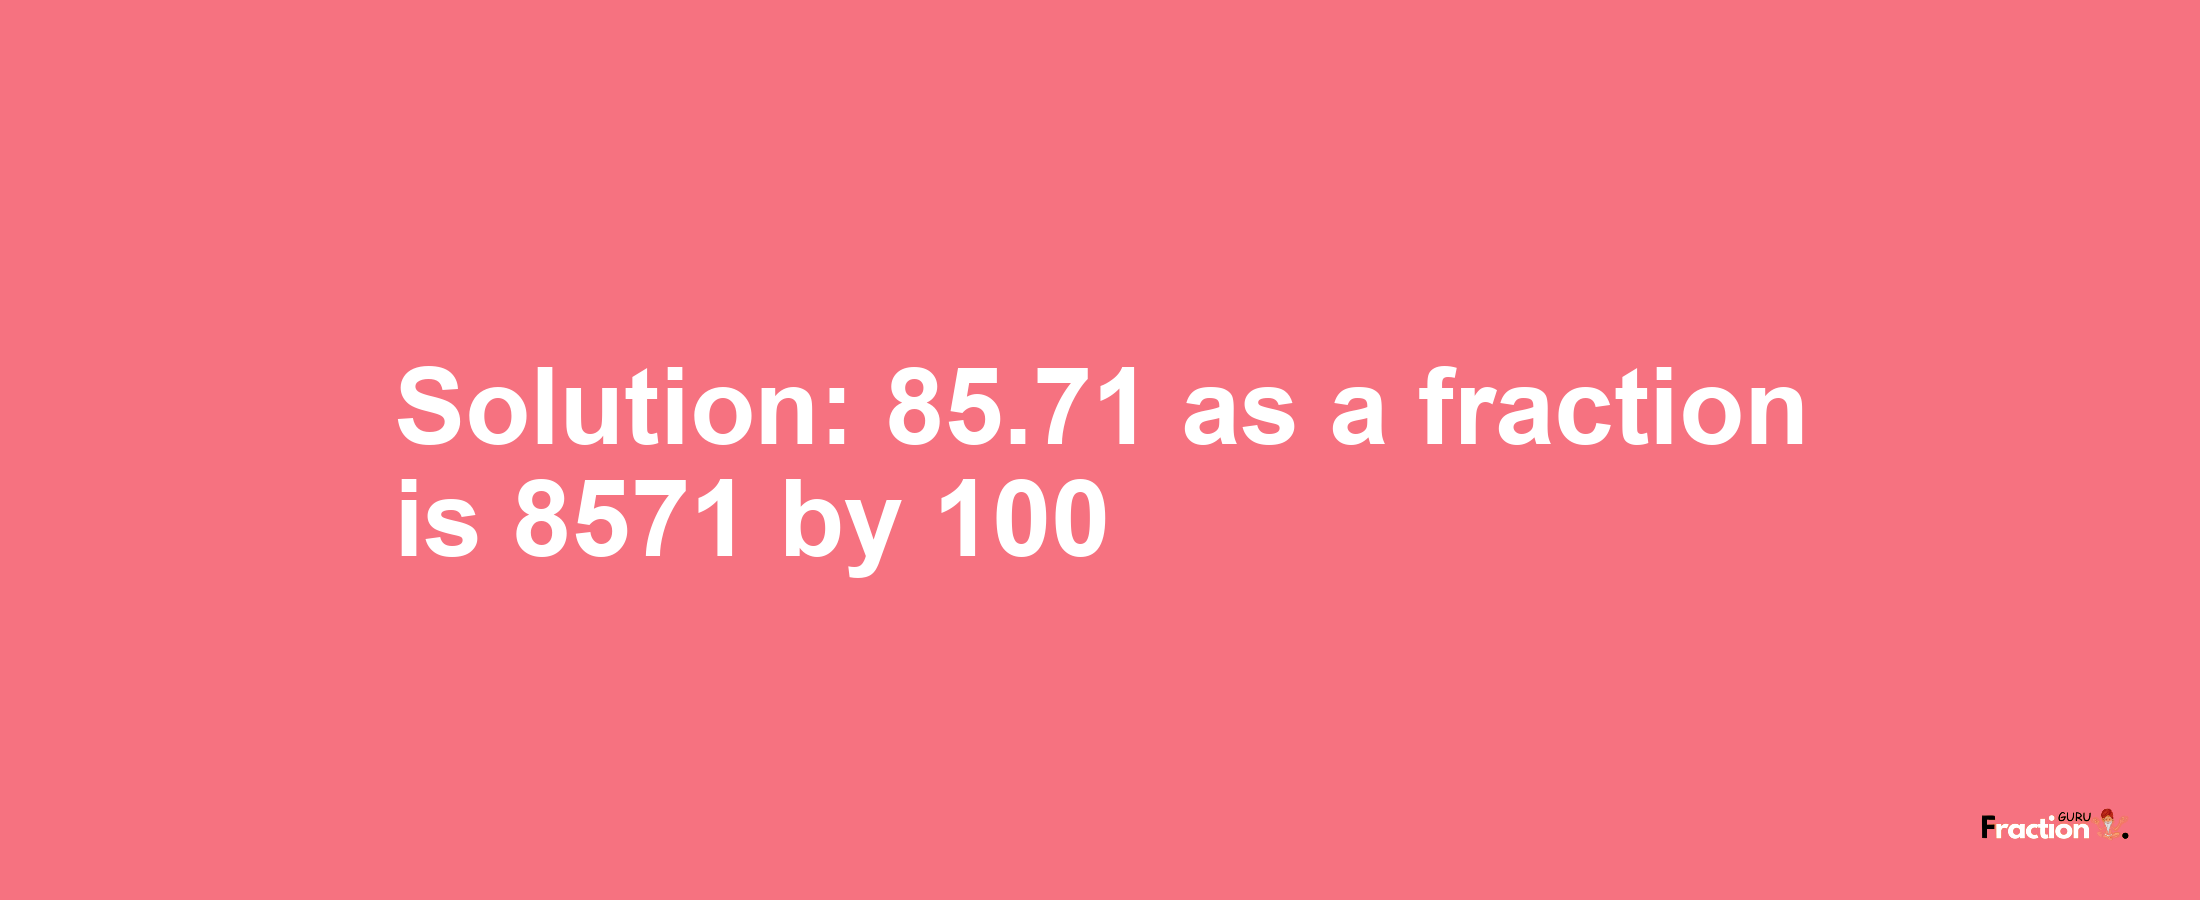 Solution:85.71 as a fraction is 8571/100